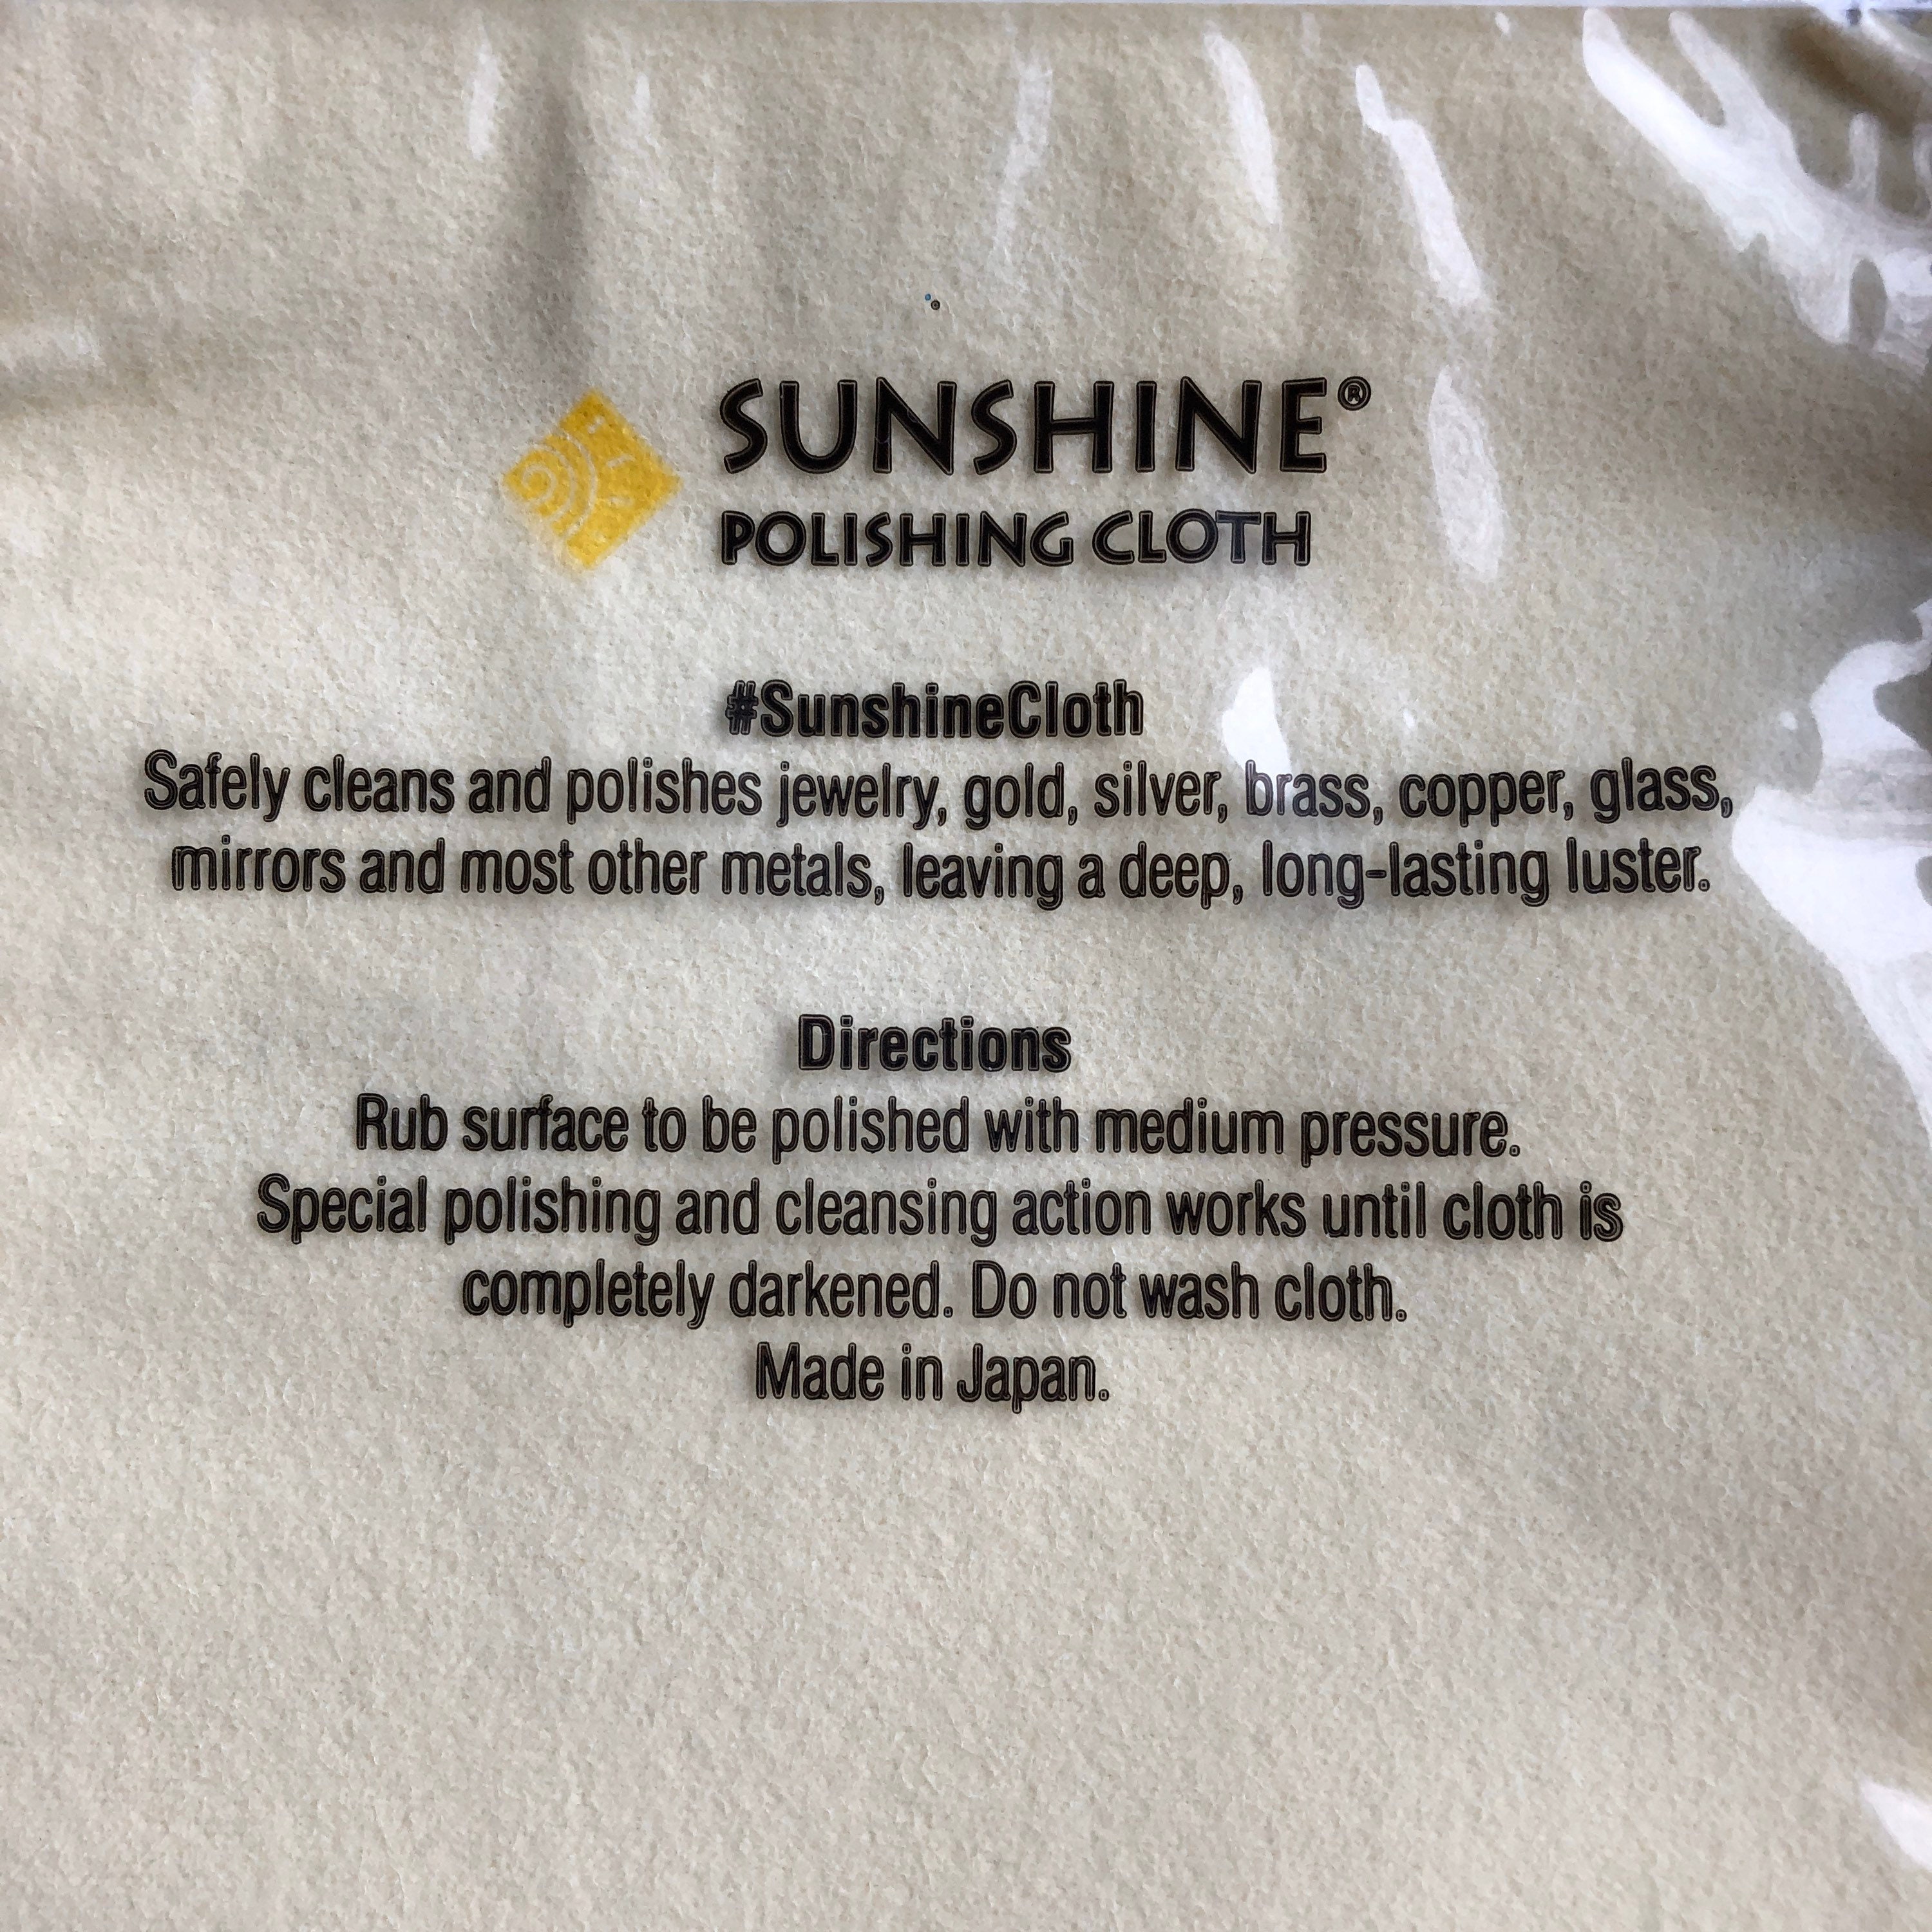 Sunshine Polishing Cloths, Bulk Pack, For Silver, Gold, Brass And Copper  Jewellery, Polishing Cloths To Keep The Shine Of Your Jewellery (Pack Of 20)